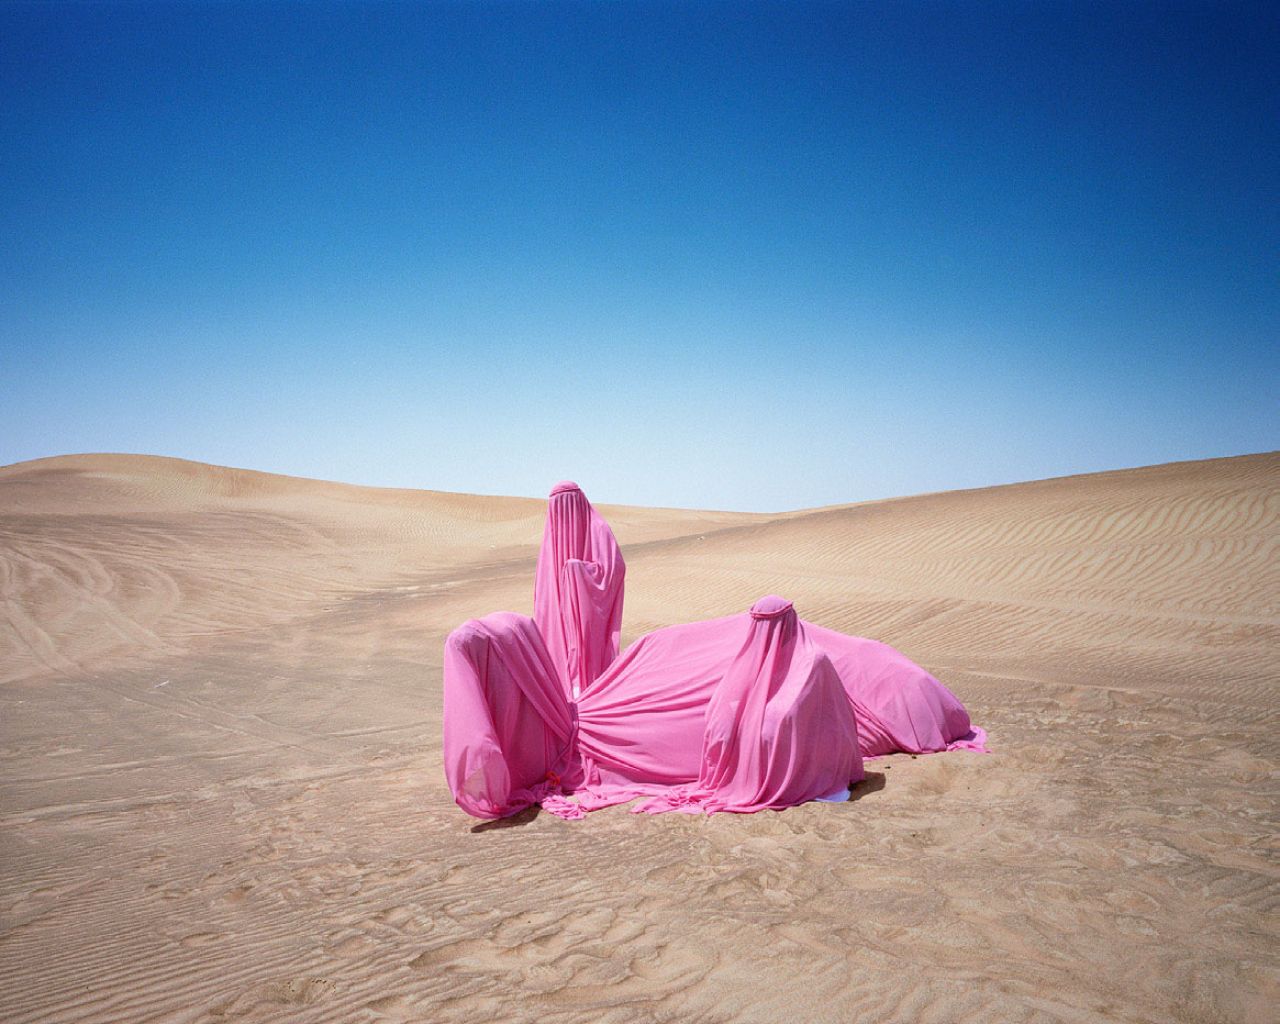 Scarlett Hooft Graafland, Still Life With Camel, 2016. All images courtesy of the artist and via Flowers Gallery